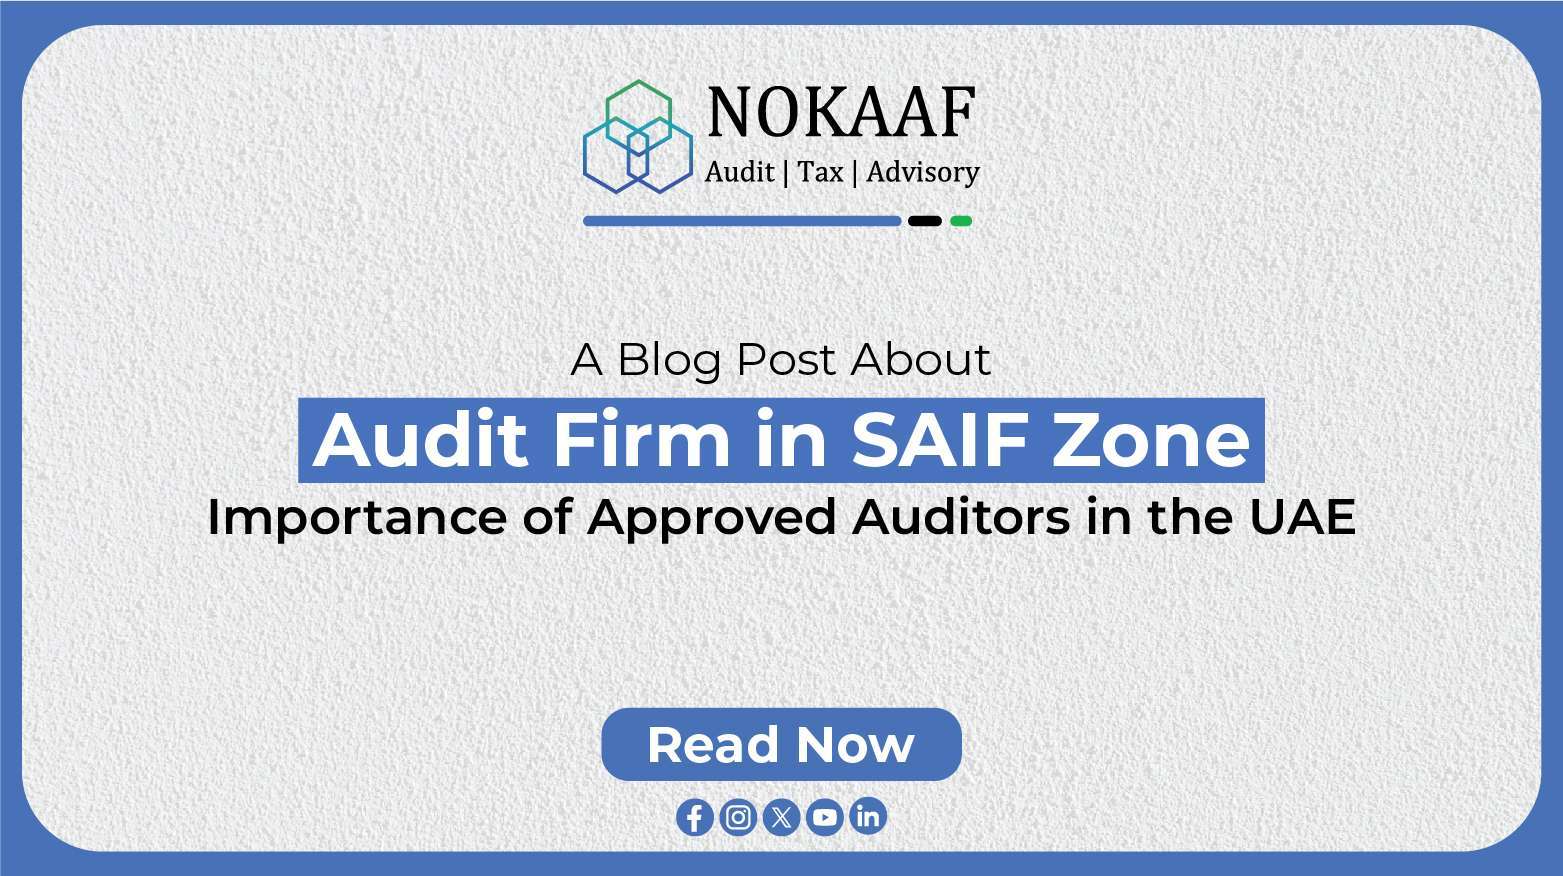 Audit Firm in SAIF Zone